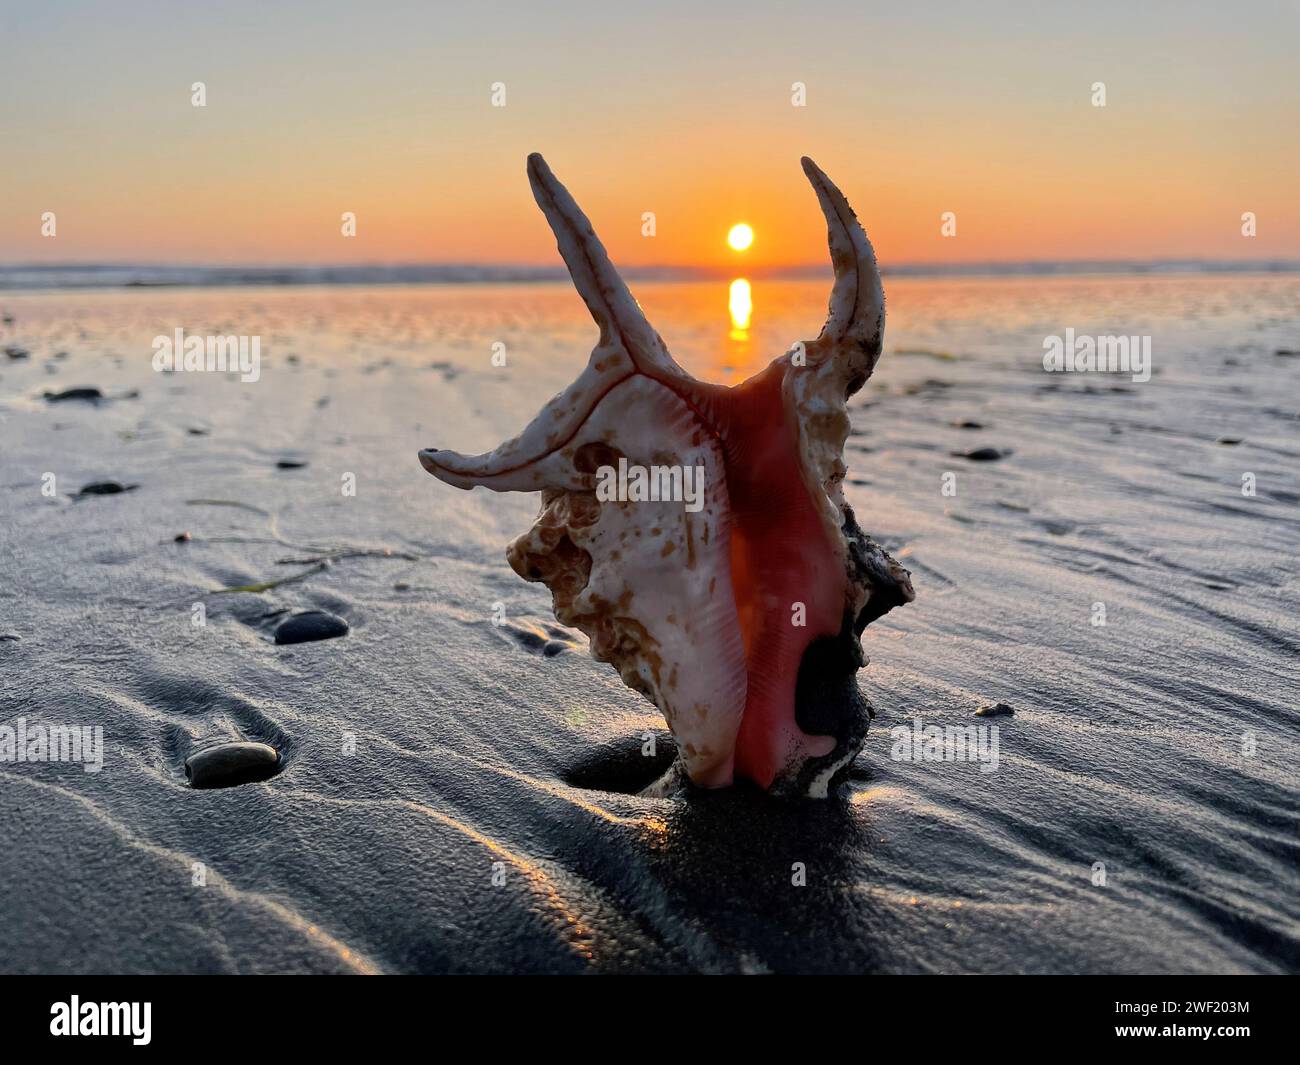 A large colorful Conch Shell on a wet beach reflecting the sunset over the Pacific Ocean. Stock Photo